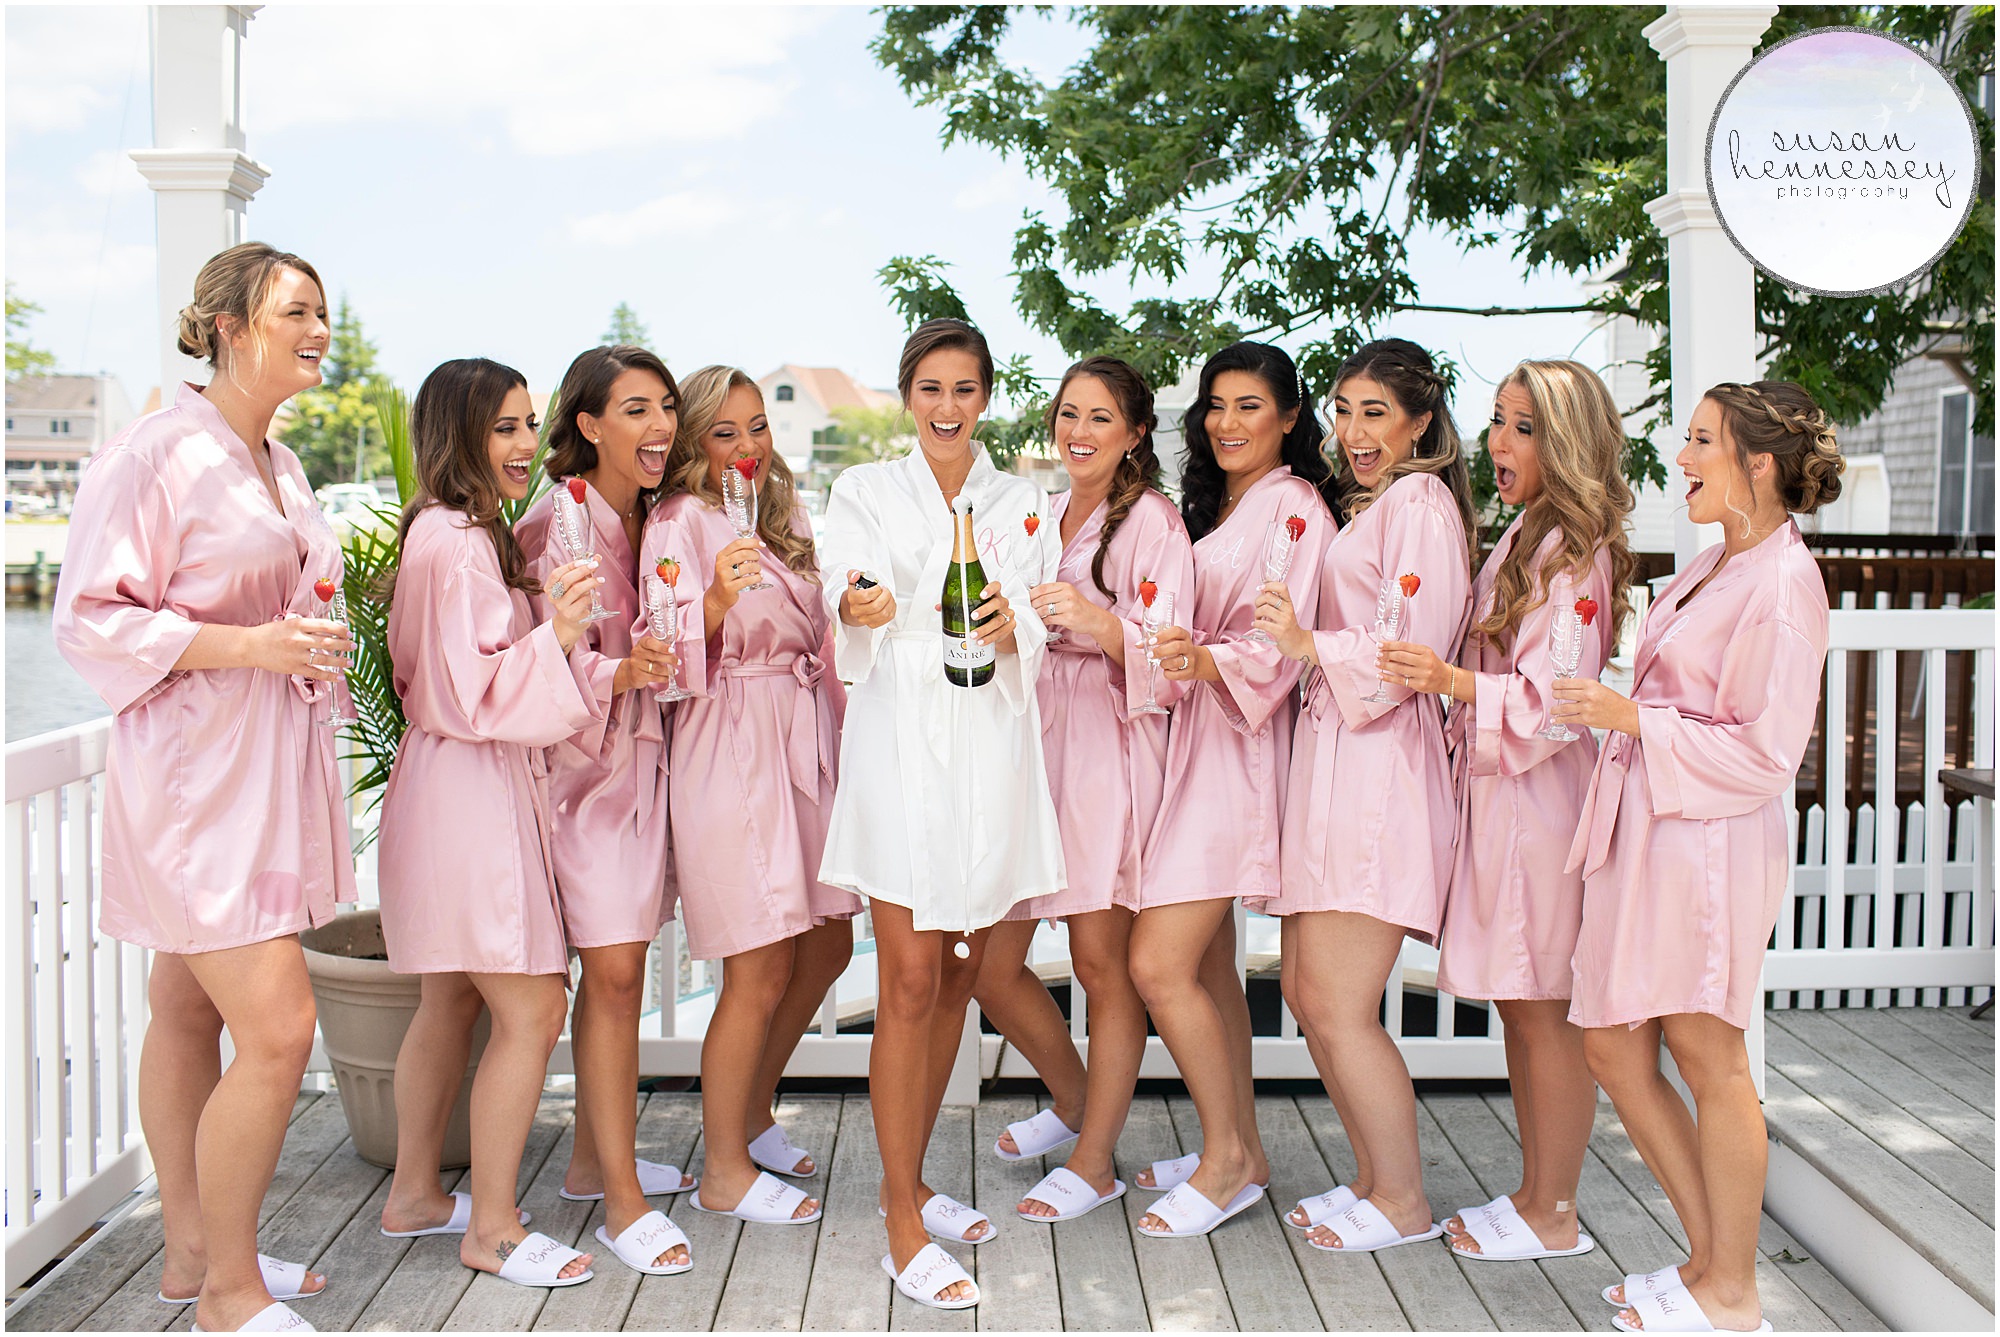 A bride and bridesmaids pop champagne in matching robes